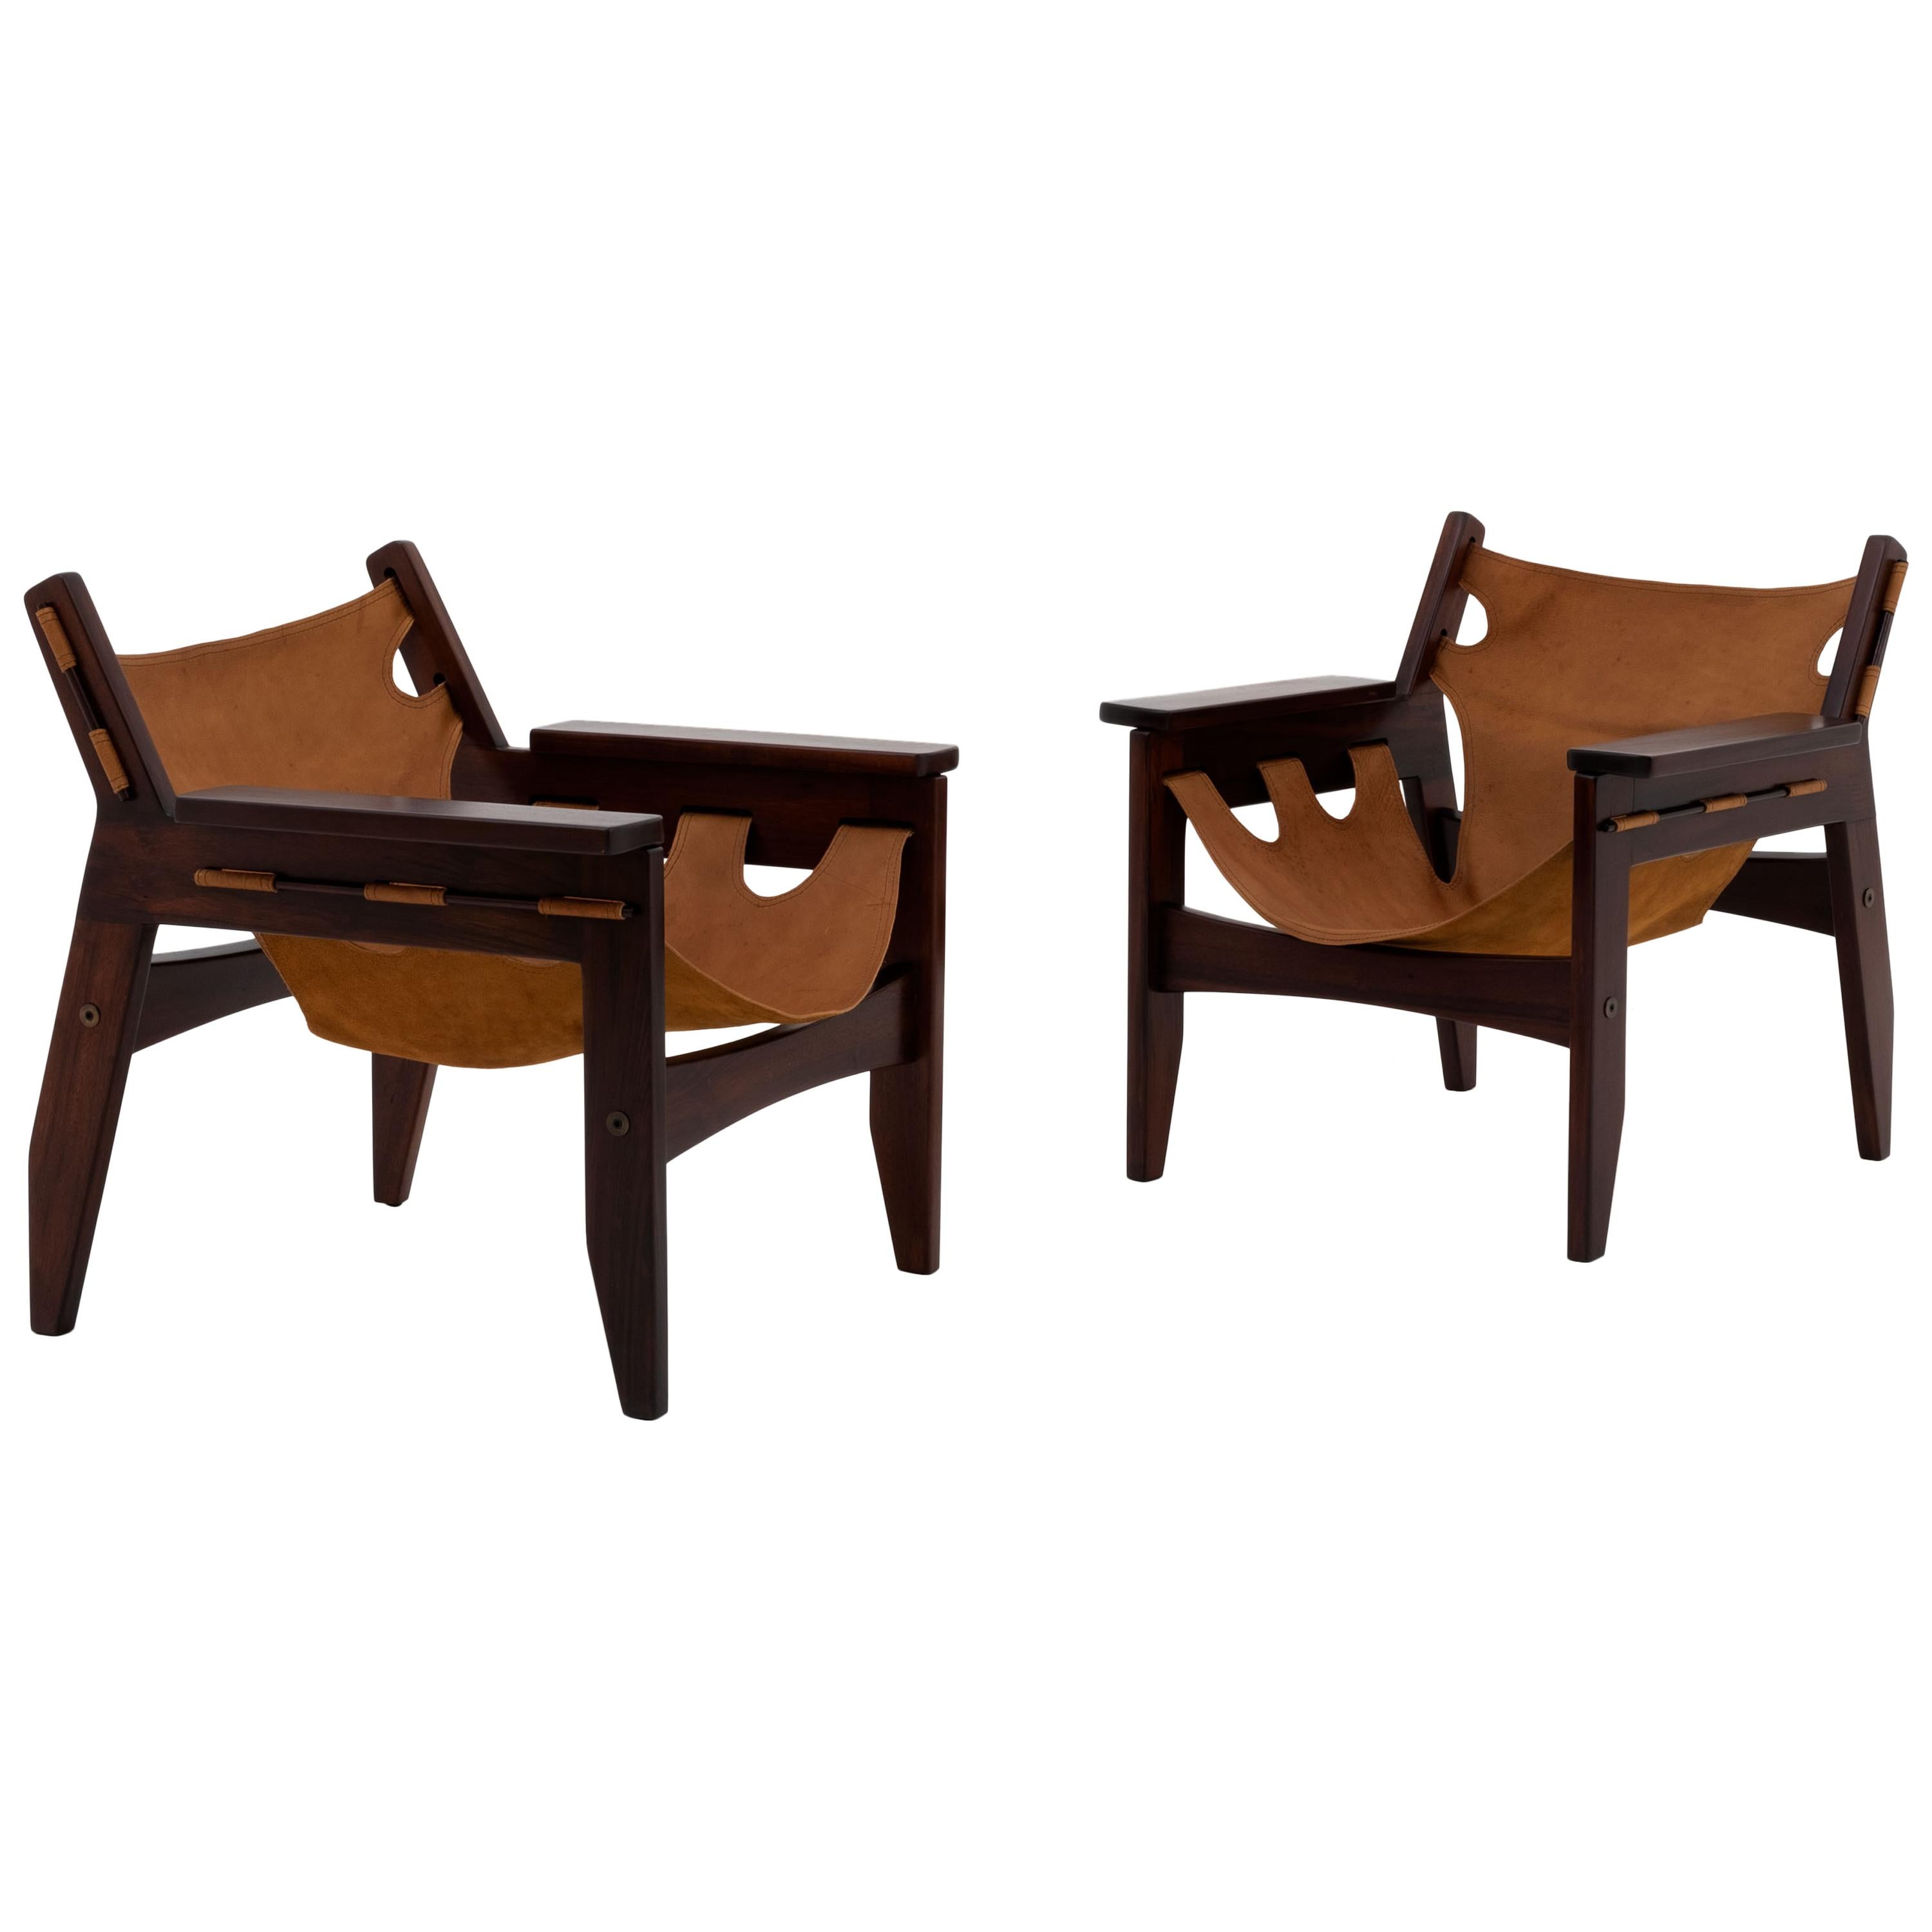 Pair of Brazilian Mid-Century Modern Lounge chairs by Sergio Rodrigues